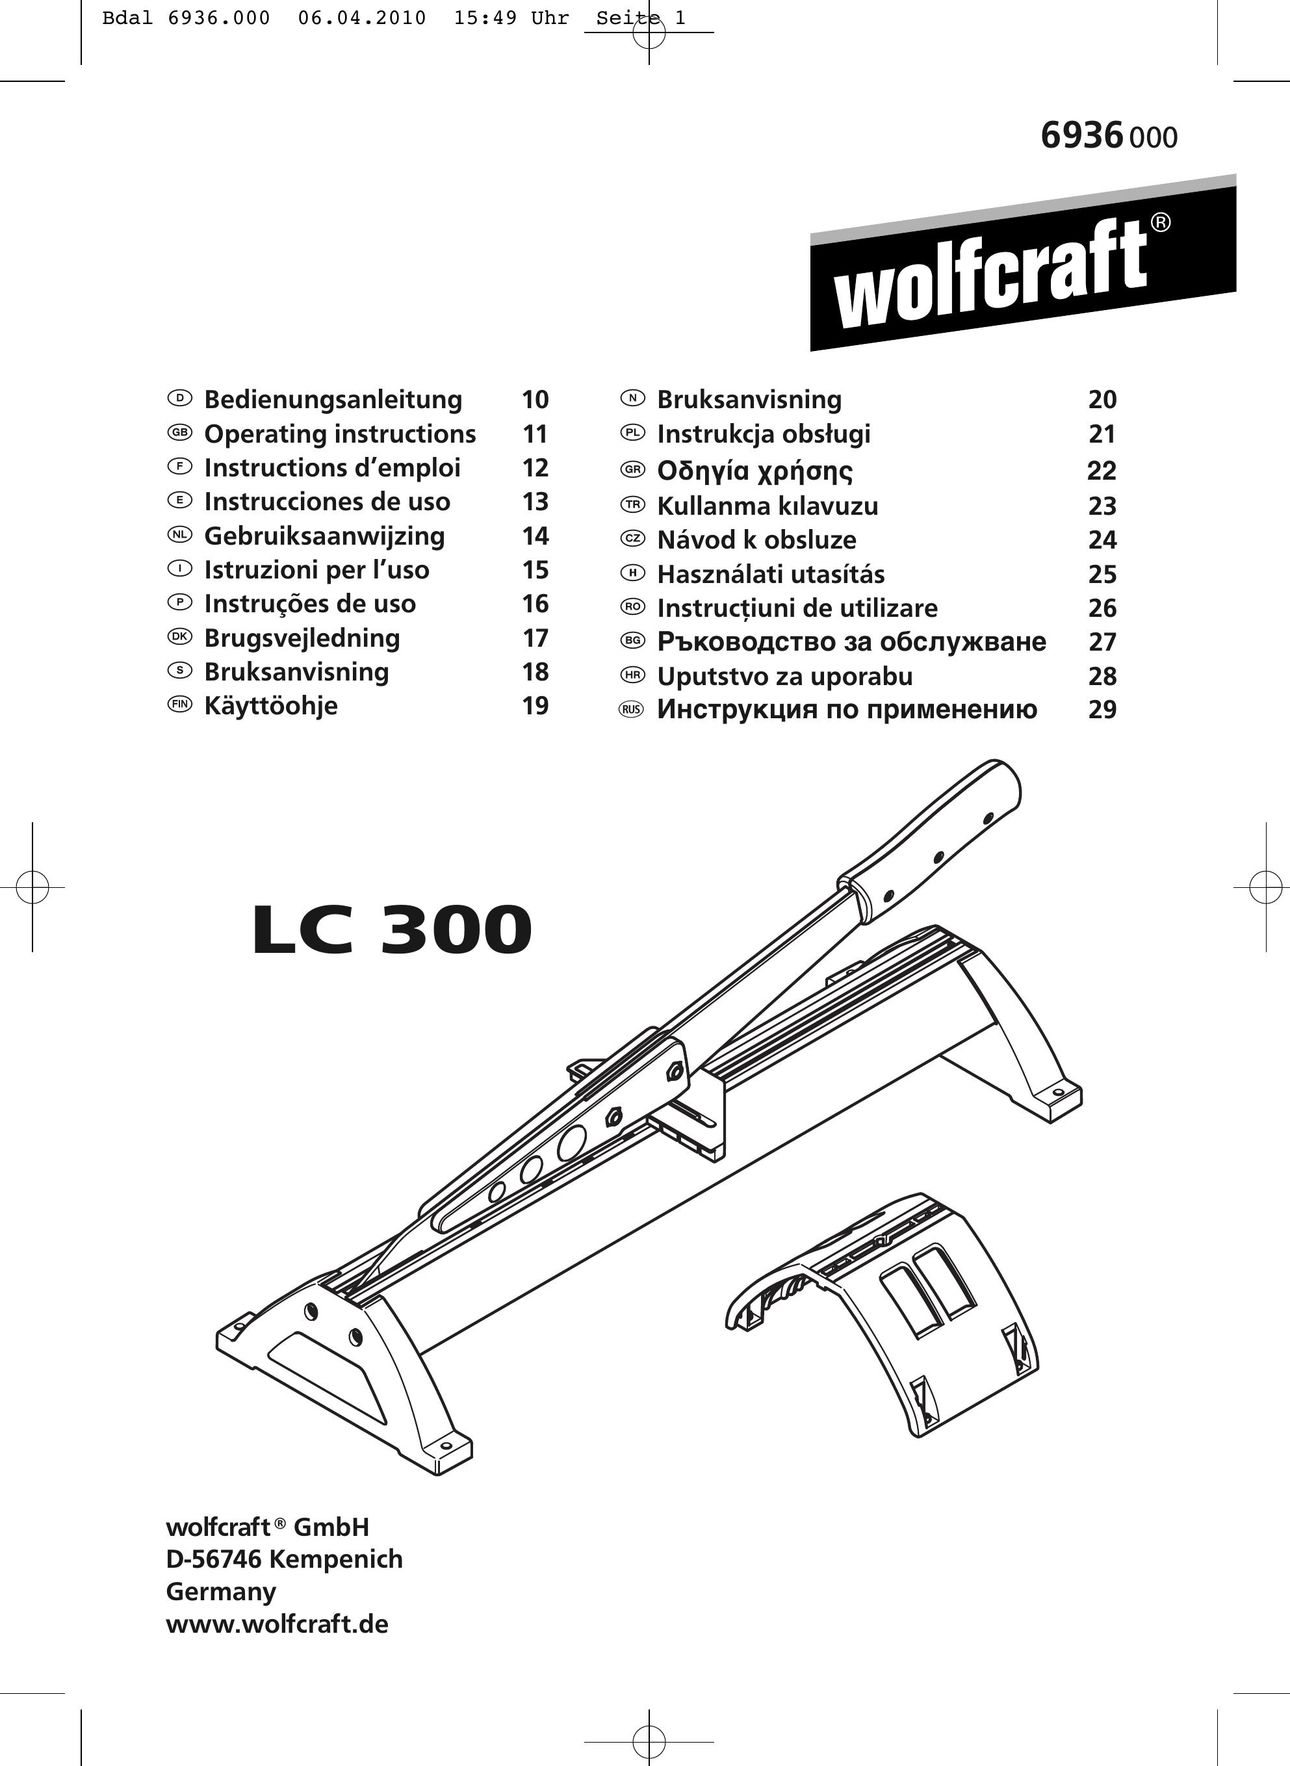 Wolfcraft LC 300 Laminate Trimmer User Manual